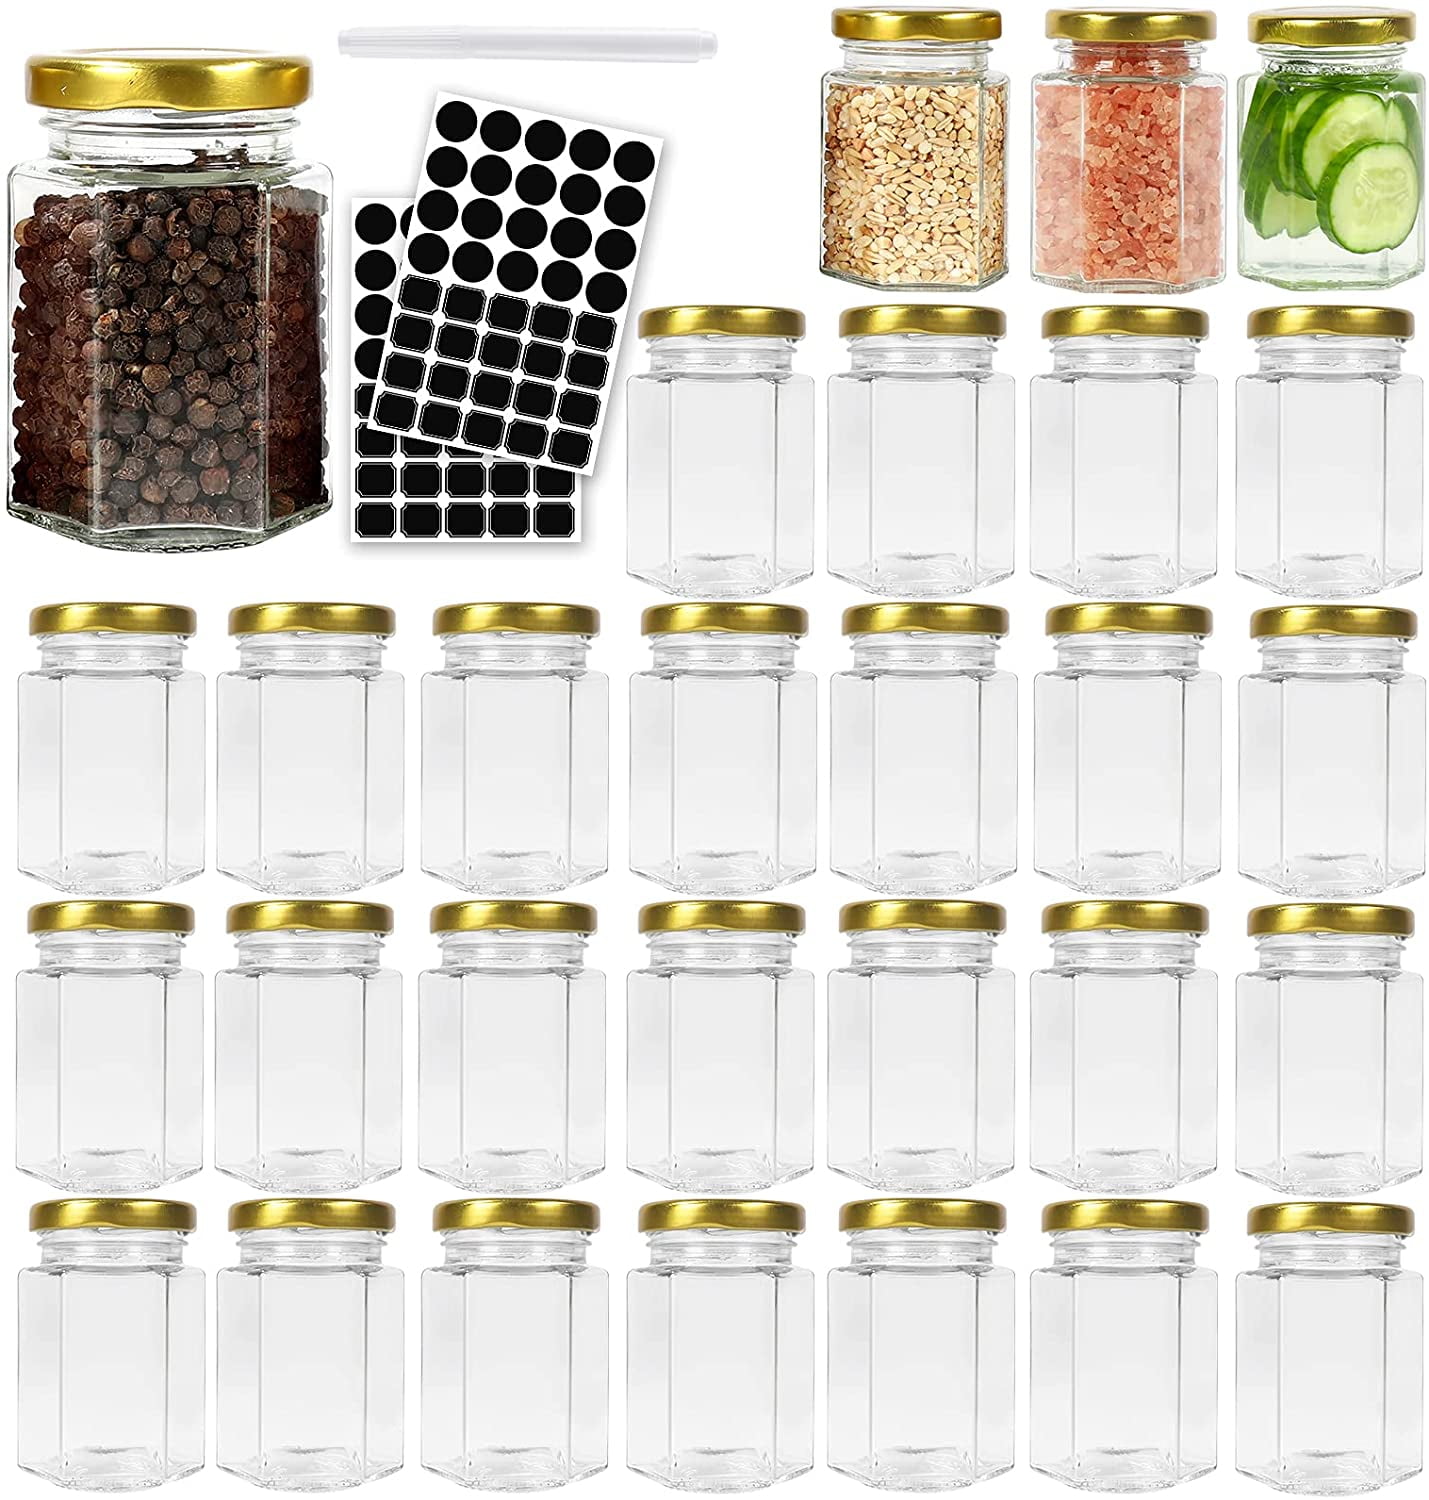 30Pack Small Spice Jars,Glass Jars with Airtight Lids with Tags Labeling